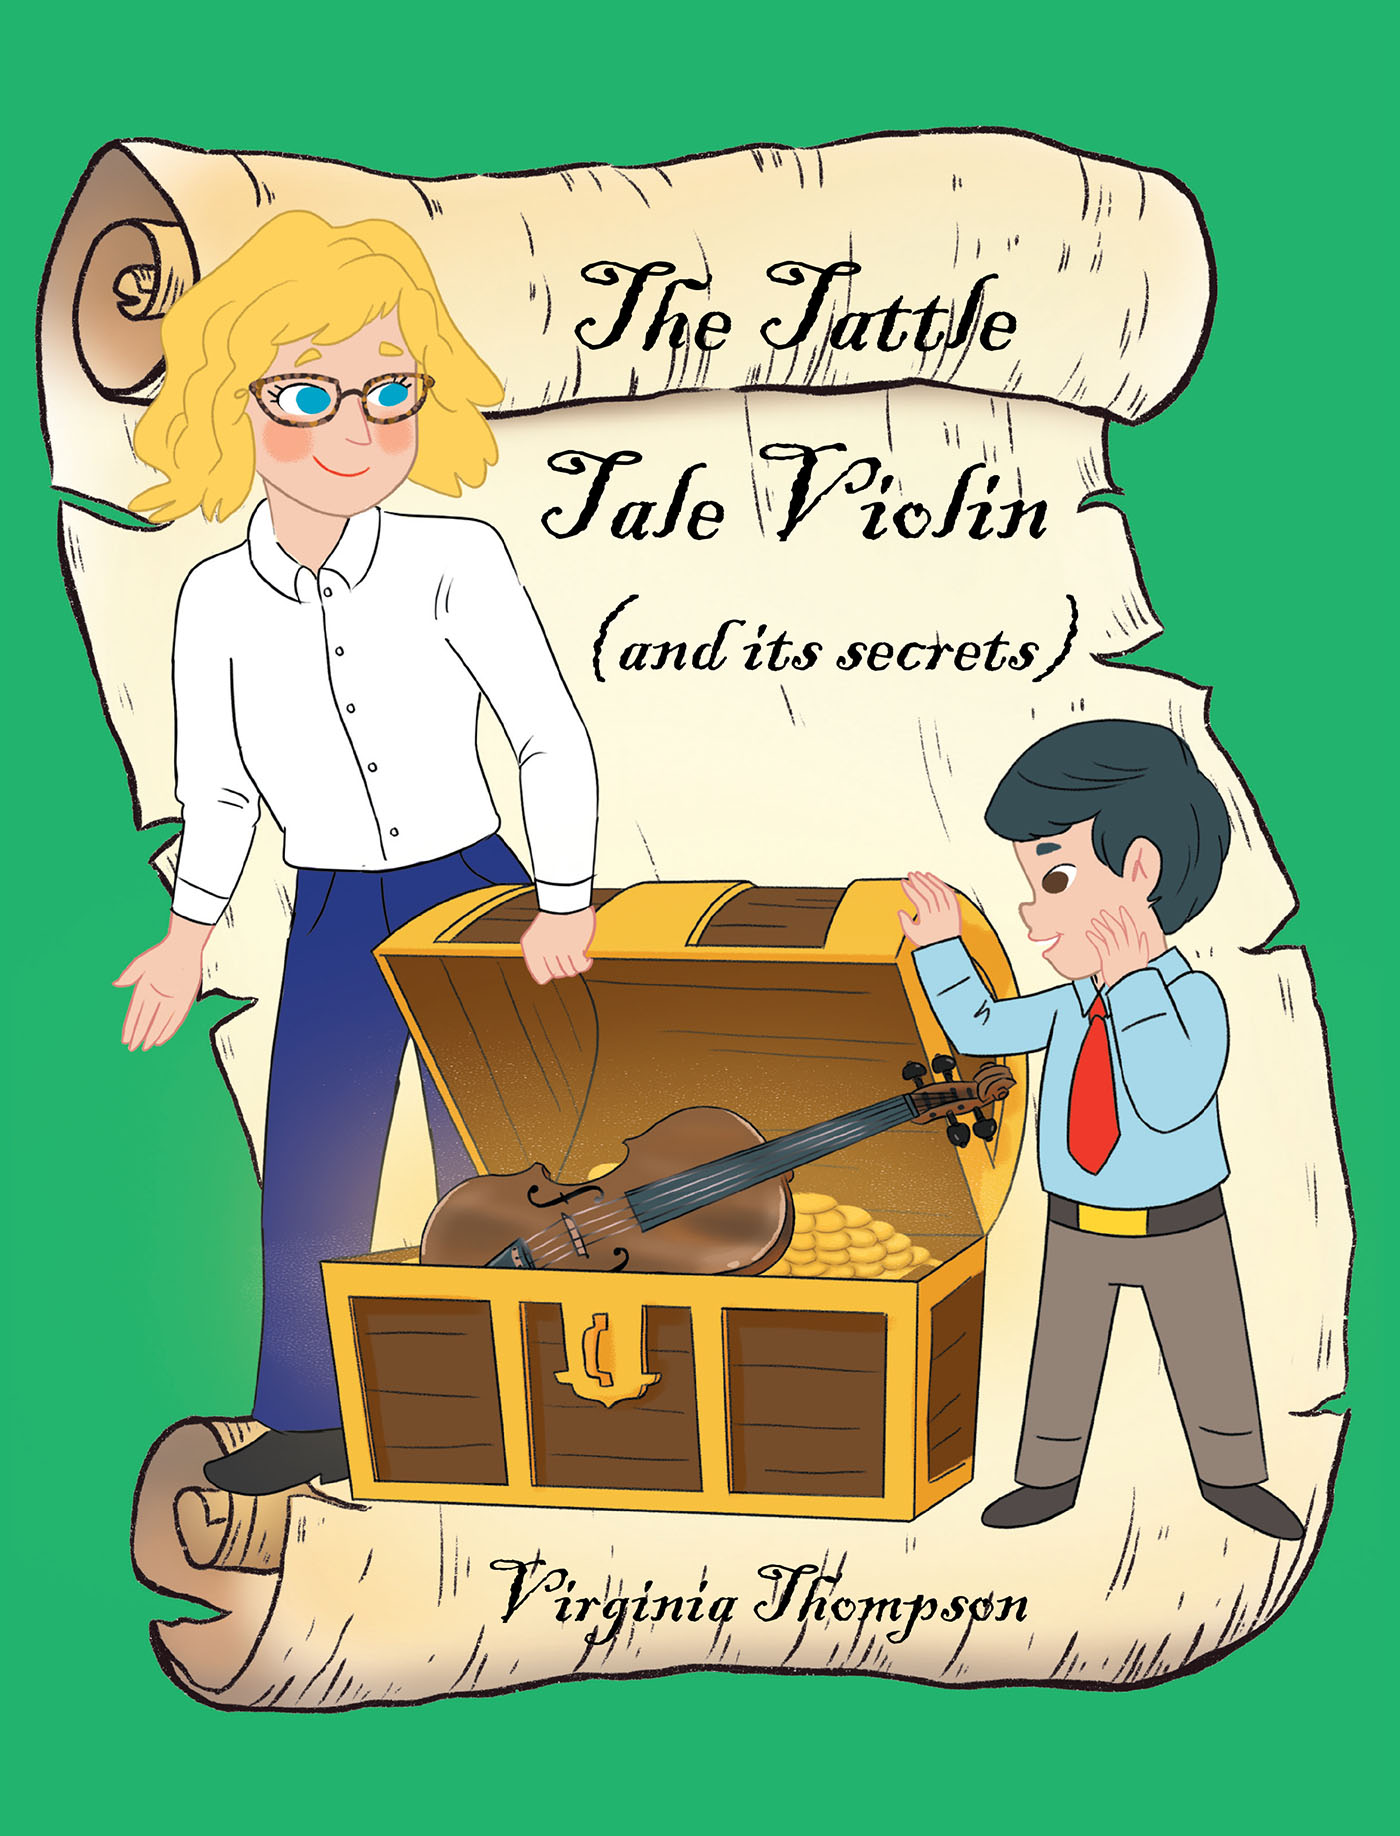 Virginia Thompson’s Newly Released “The Tattle Tale Violin (and its secrets)” is a Charming Teaching Narrative